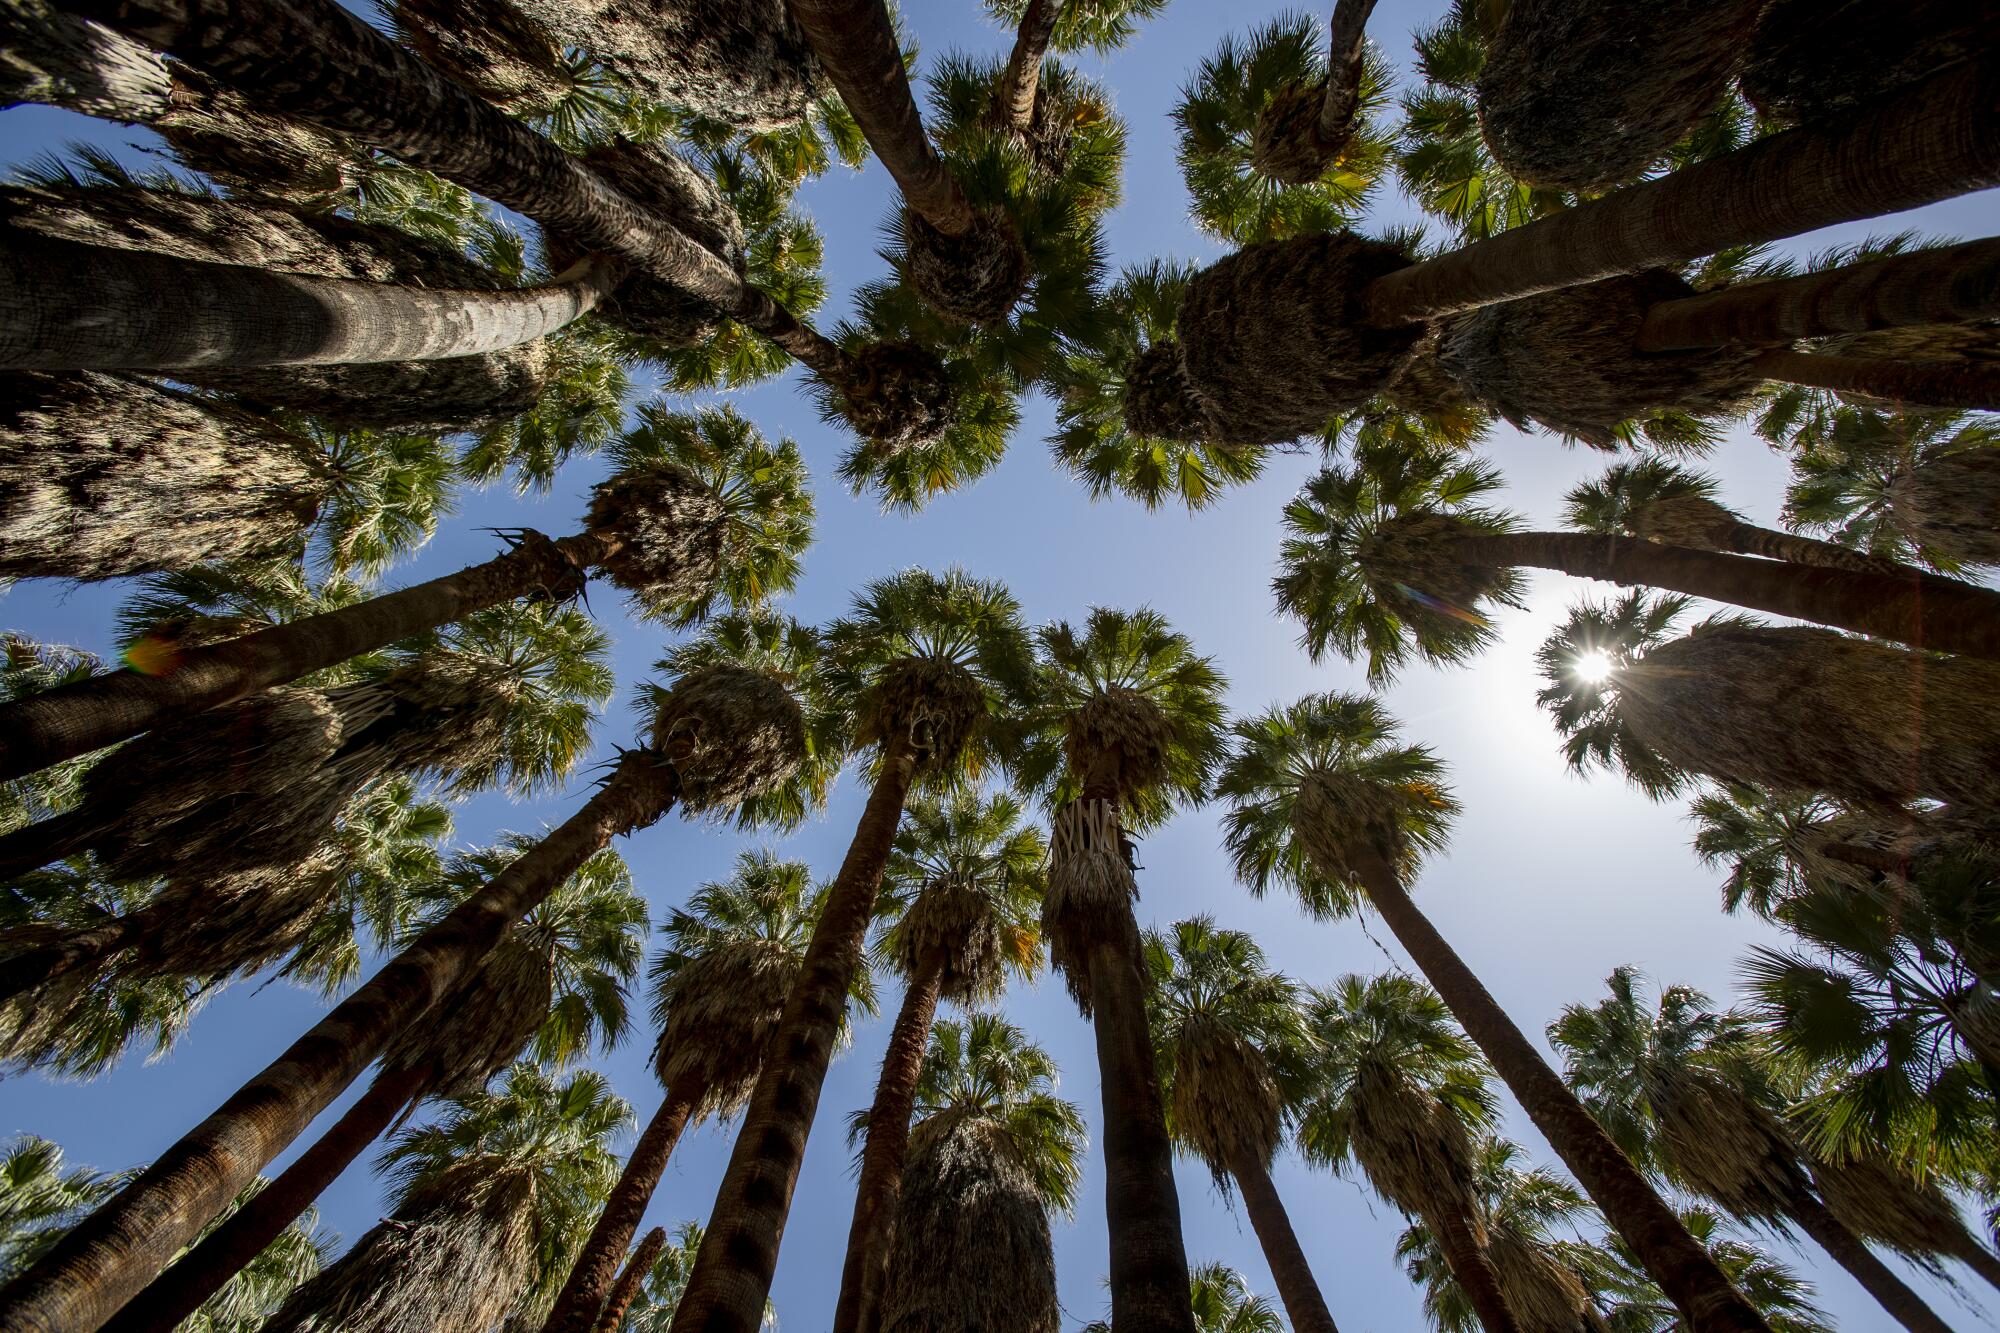 The tops of fan palm trees are seen from the ground.